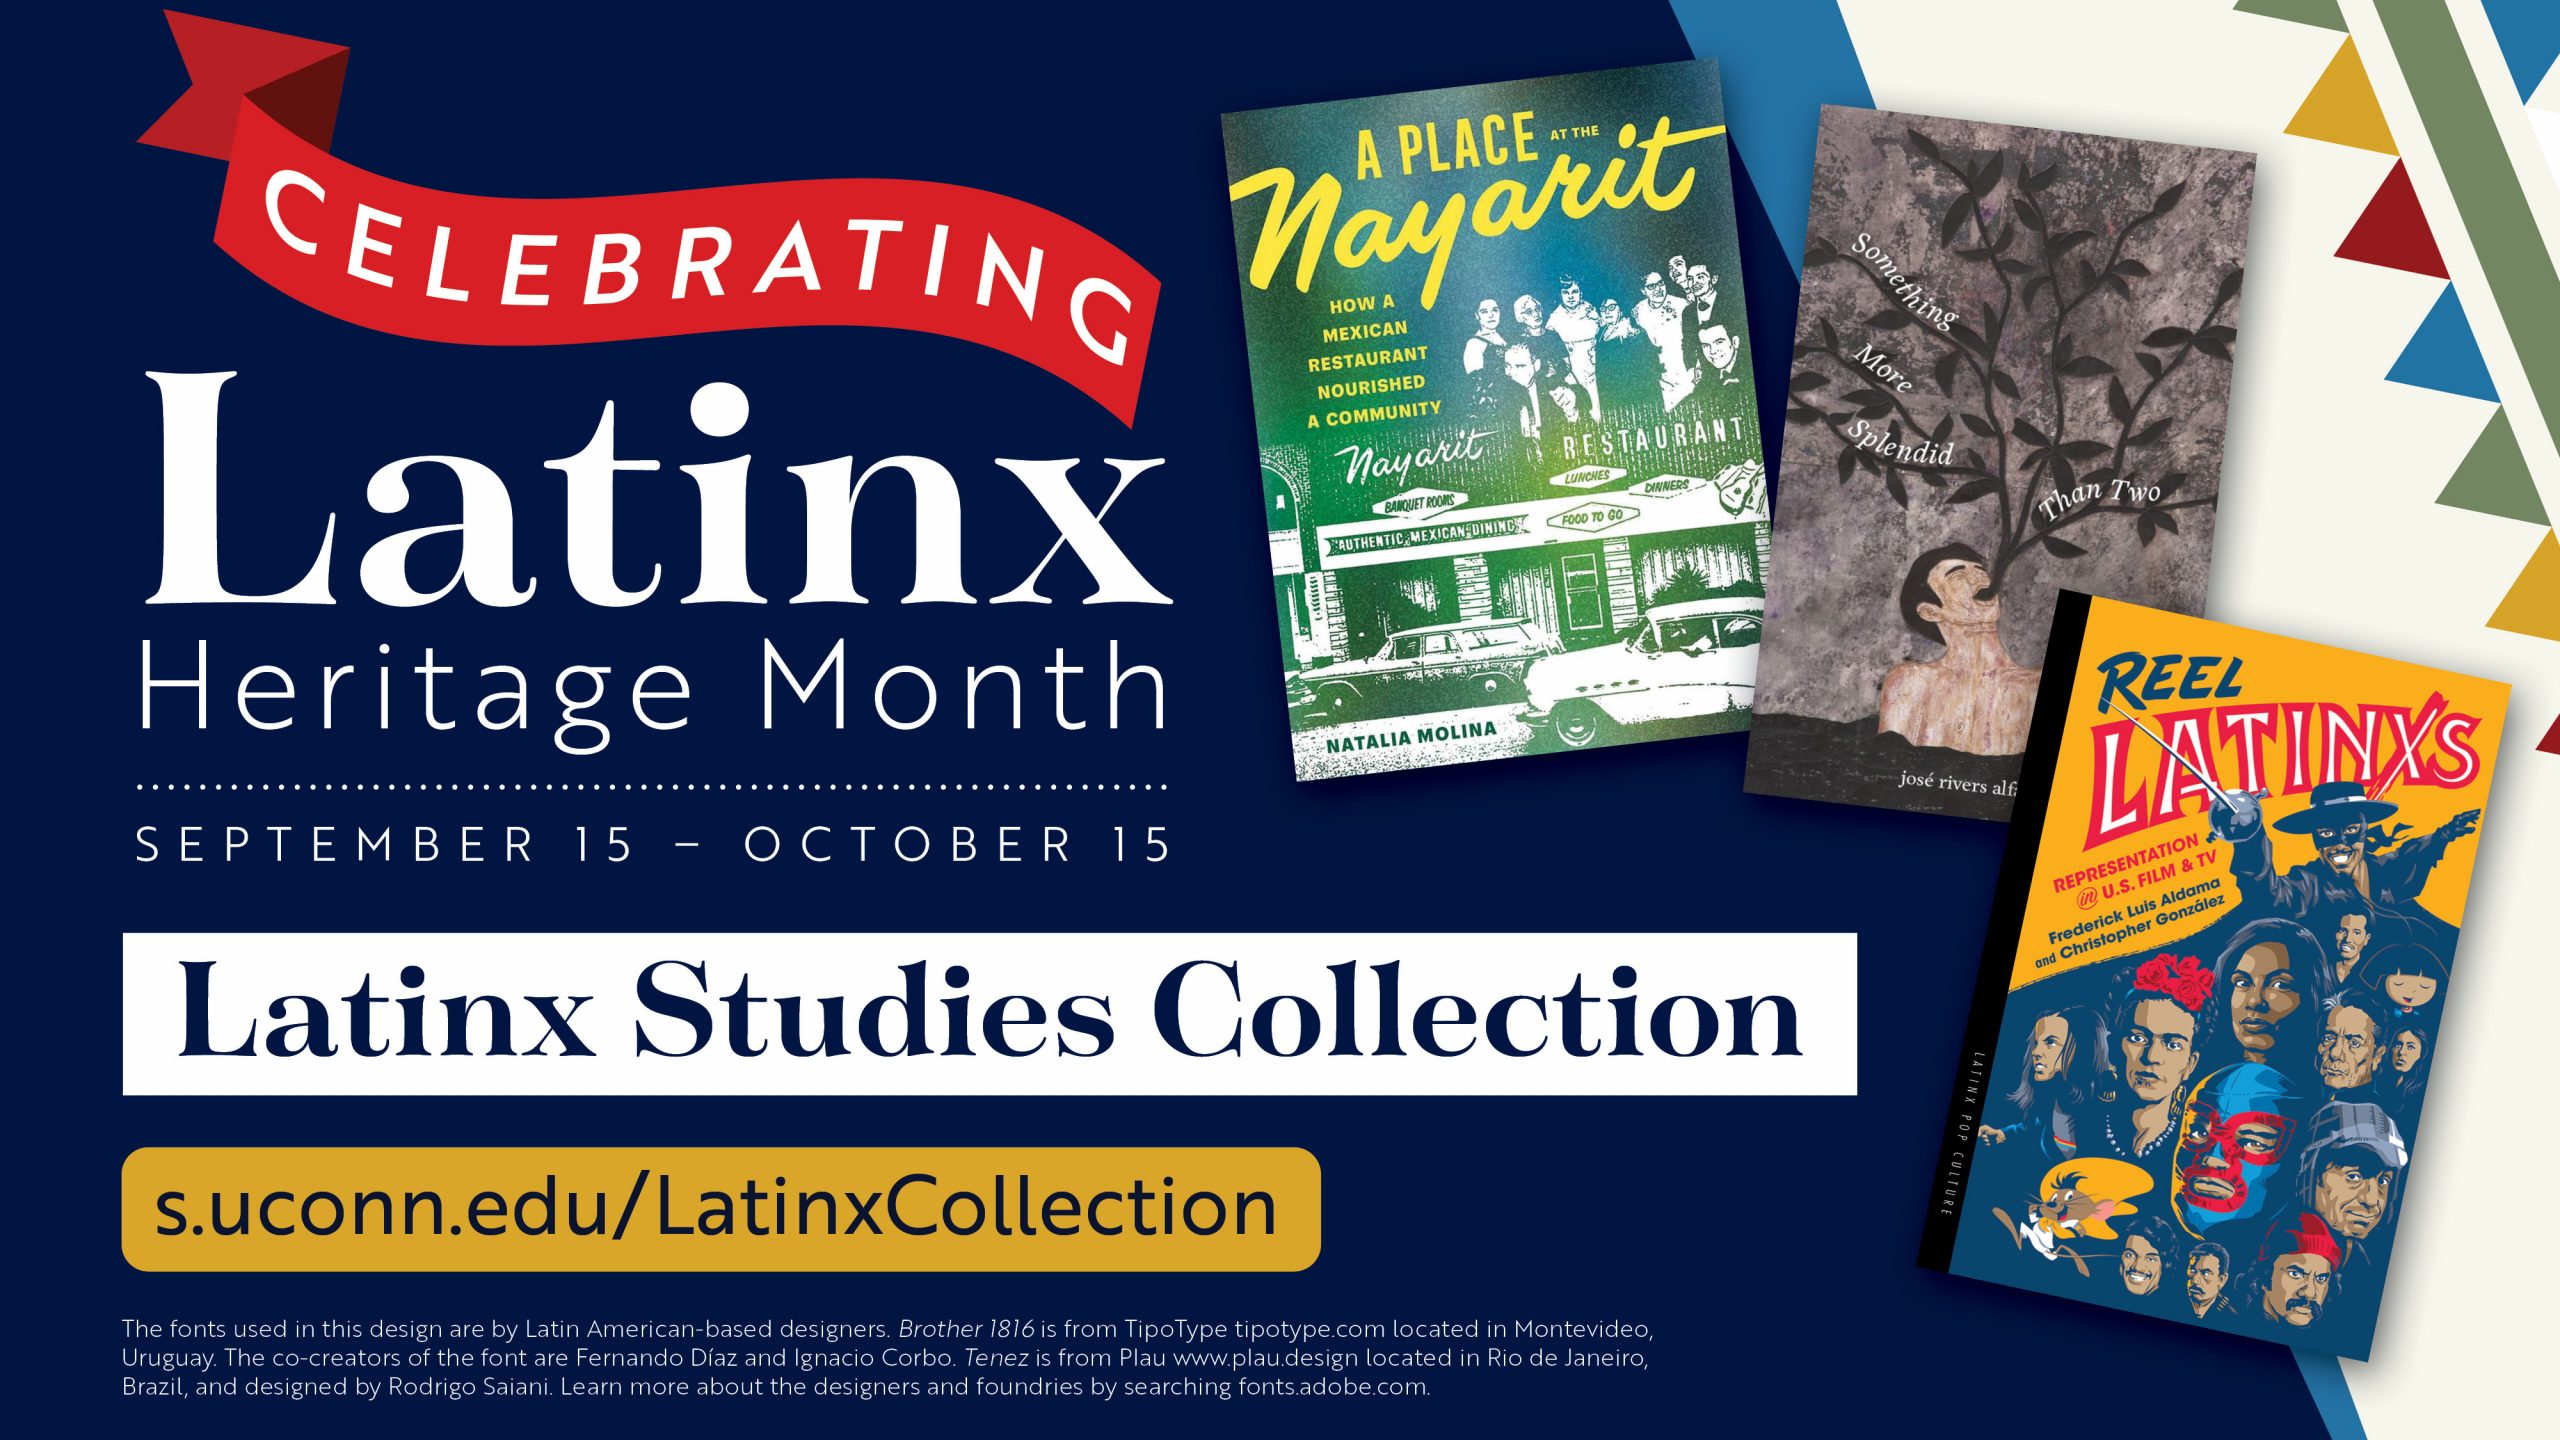 Book collection on a decorative background. Text reads: Celebrating Latinx Heritage Month September 15 - October 15. Browse the Latinx Studies Collection at s.uconn.edu/LatinxCollection.